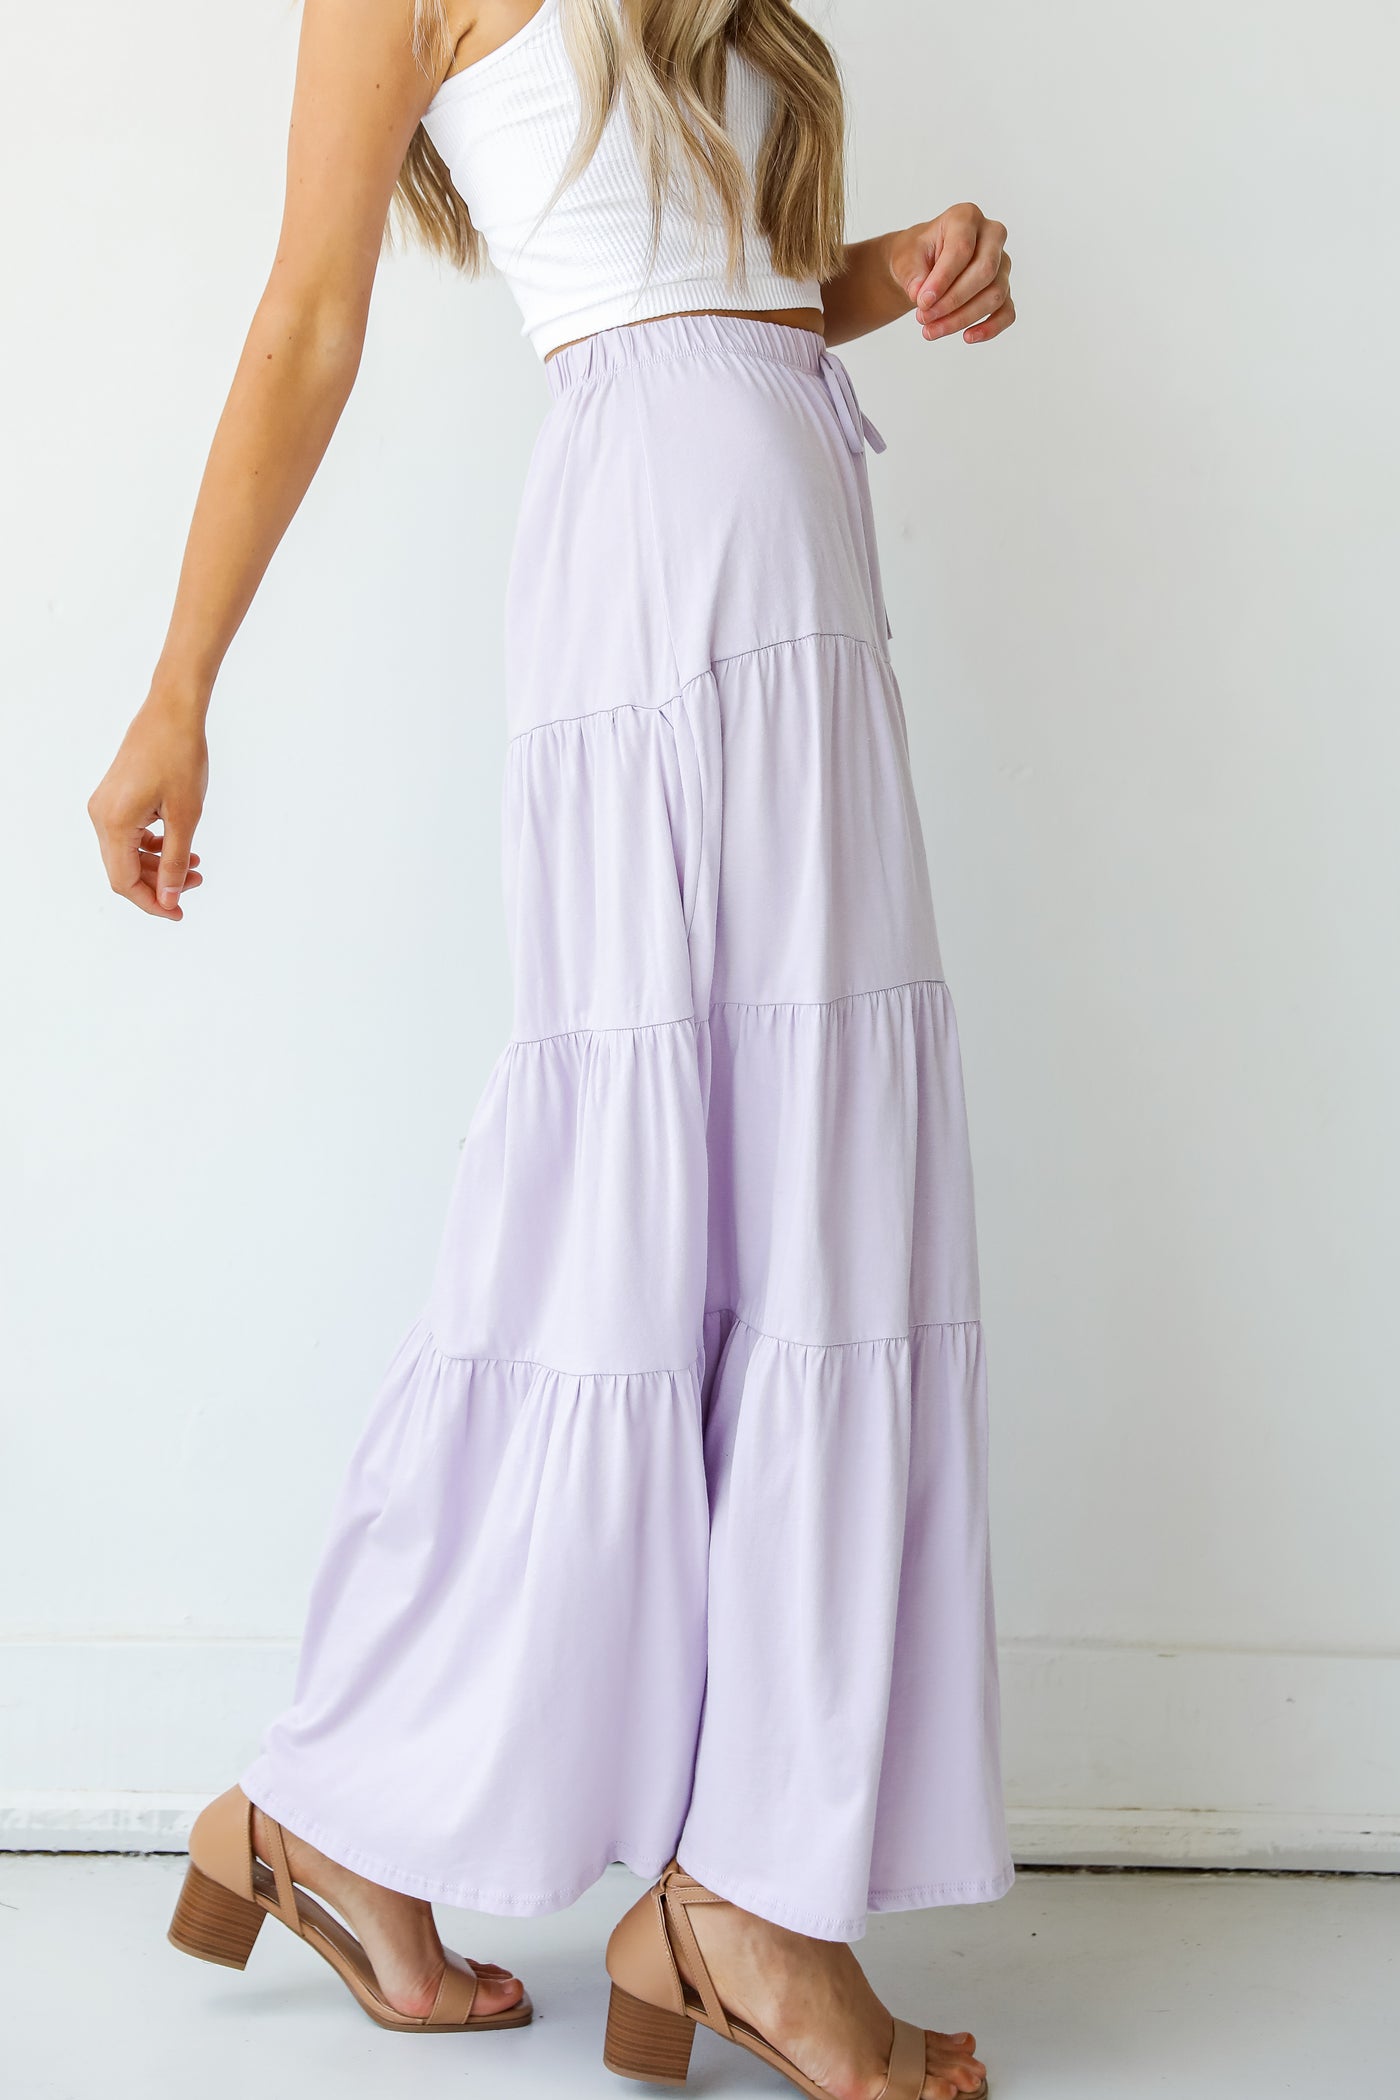 Tiered Maxi Skirt in lilac side view